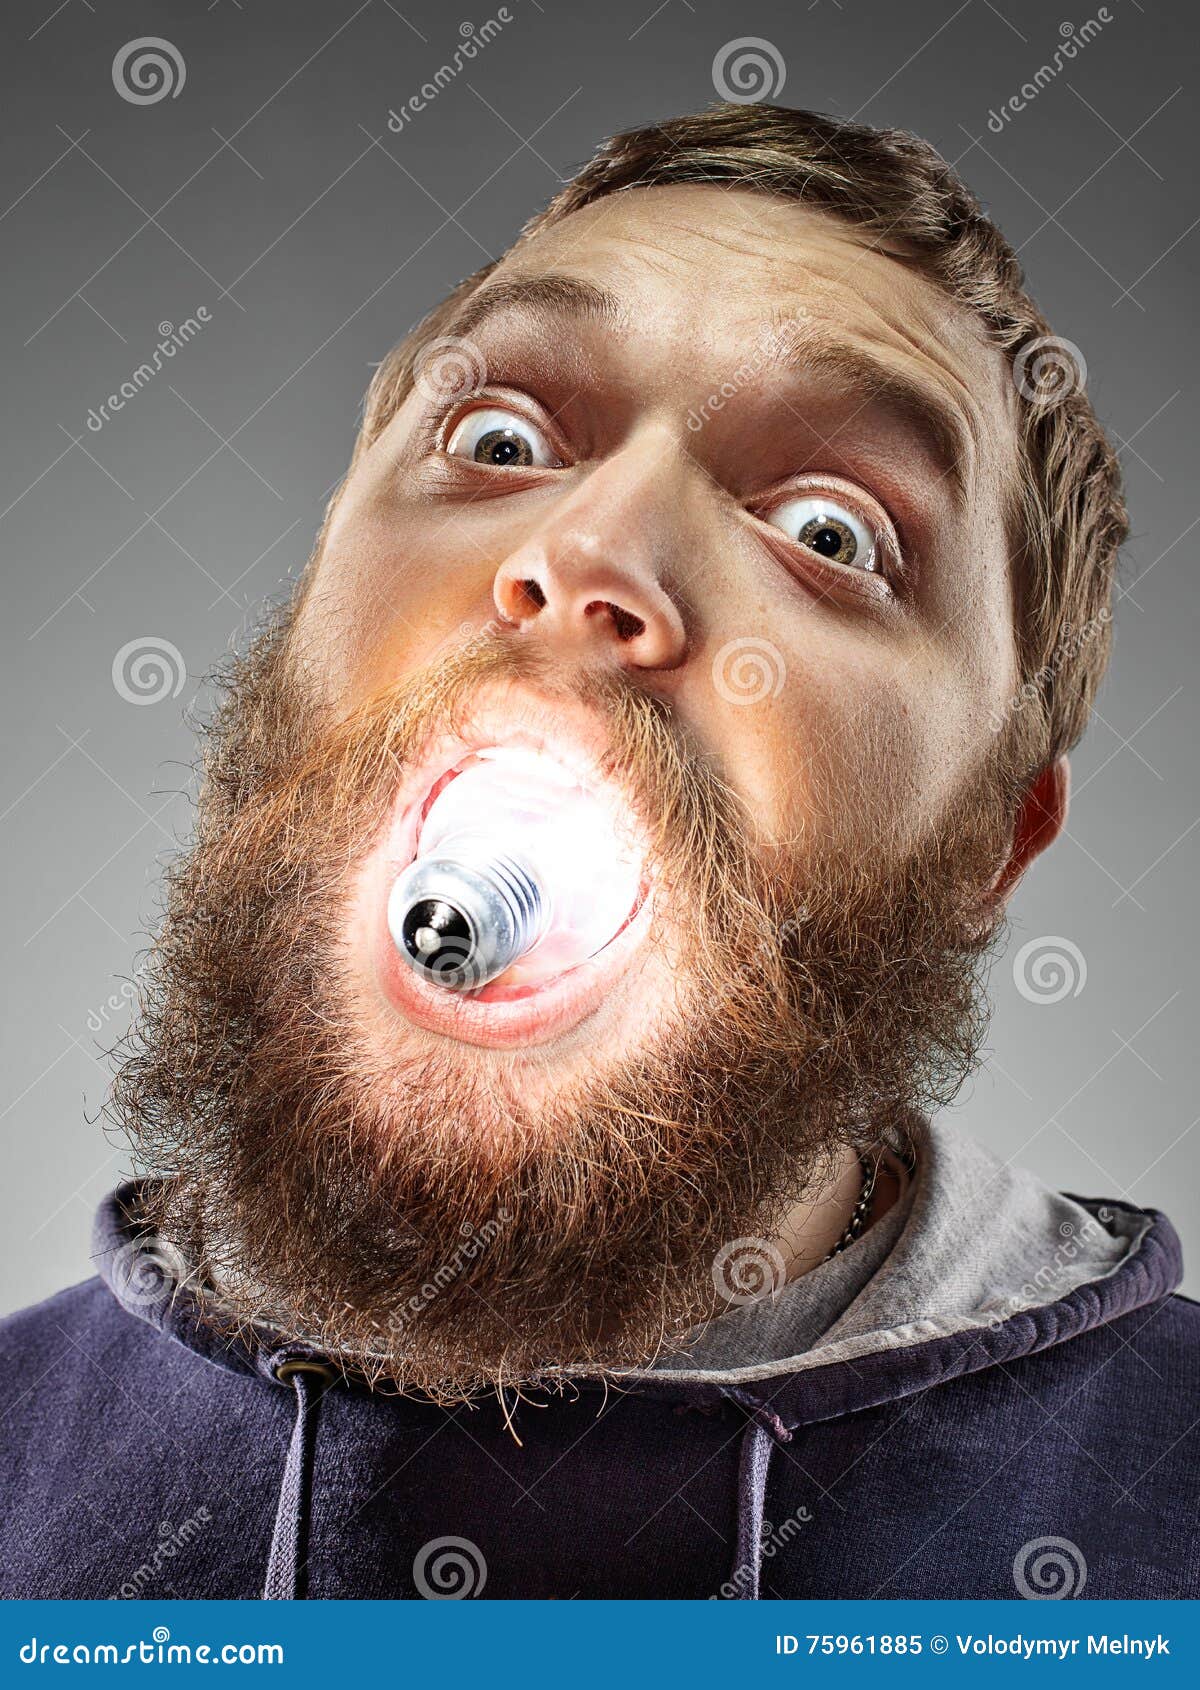 603 Light Bulb Mouth Stock Photos - Free Stock Photos from